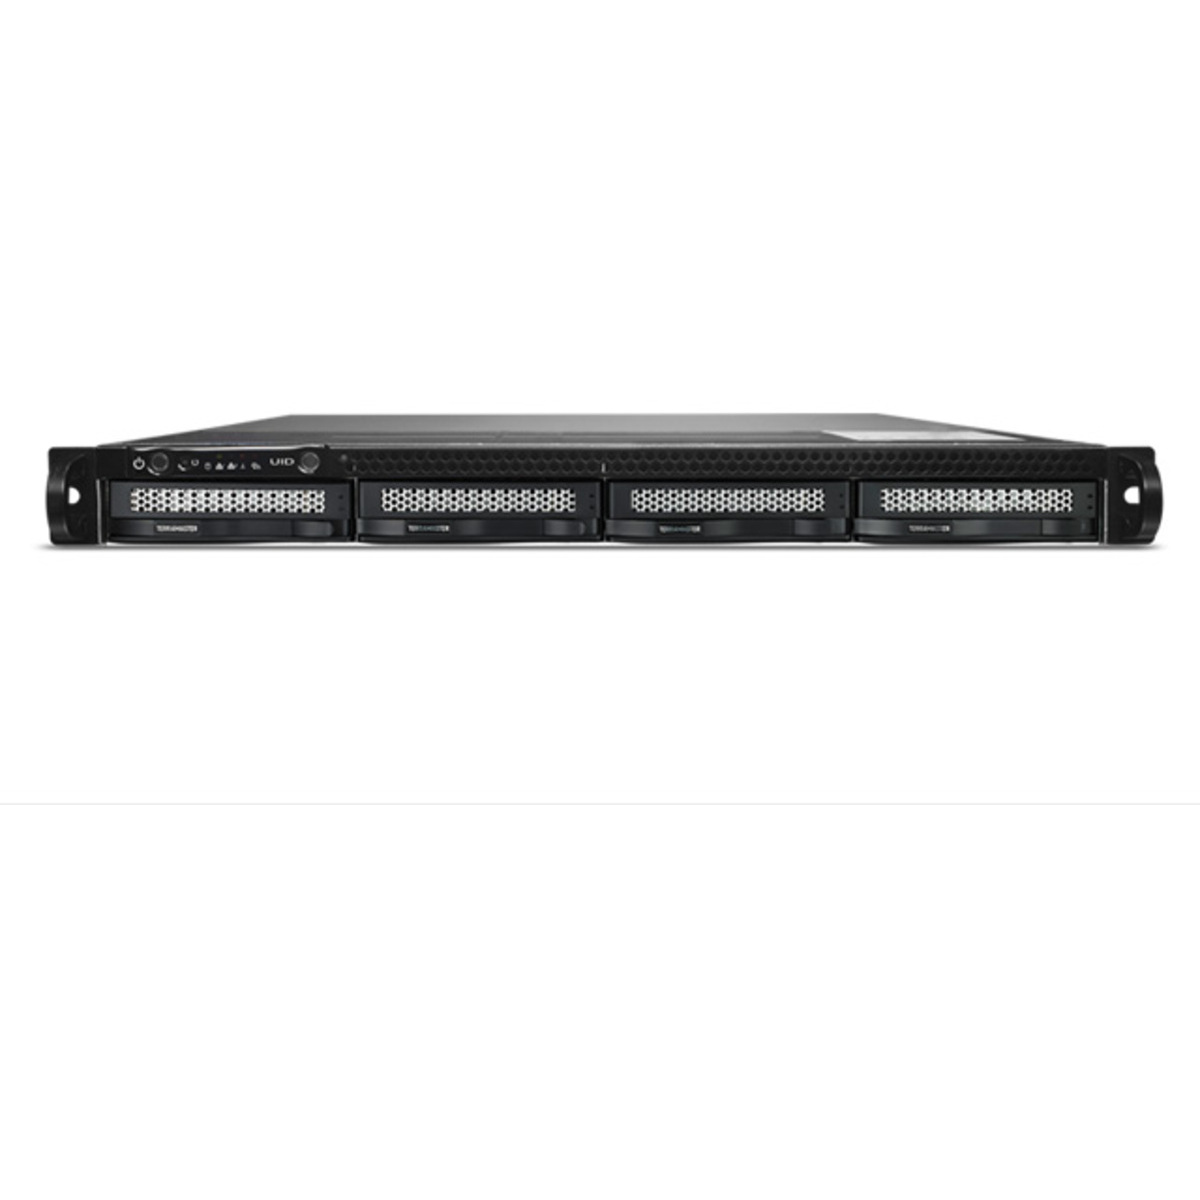 TerraMaster U4-111 60tb 4-Bay RackMount Multimedia / Power User / Business NAS - Network Attached Storage Device 3x20tb Western Digital Red Pro WD201KFGX 3.5 7200rpm SATA 6Gb/s HDD NAS Class Drives Installed - Burn-In Tested U4-111